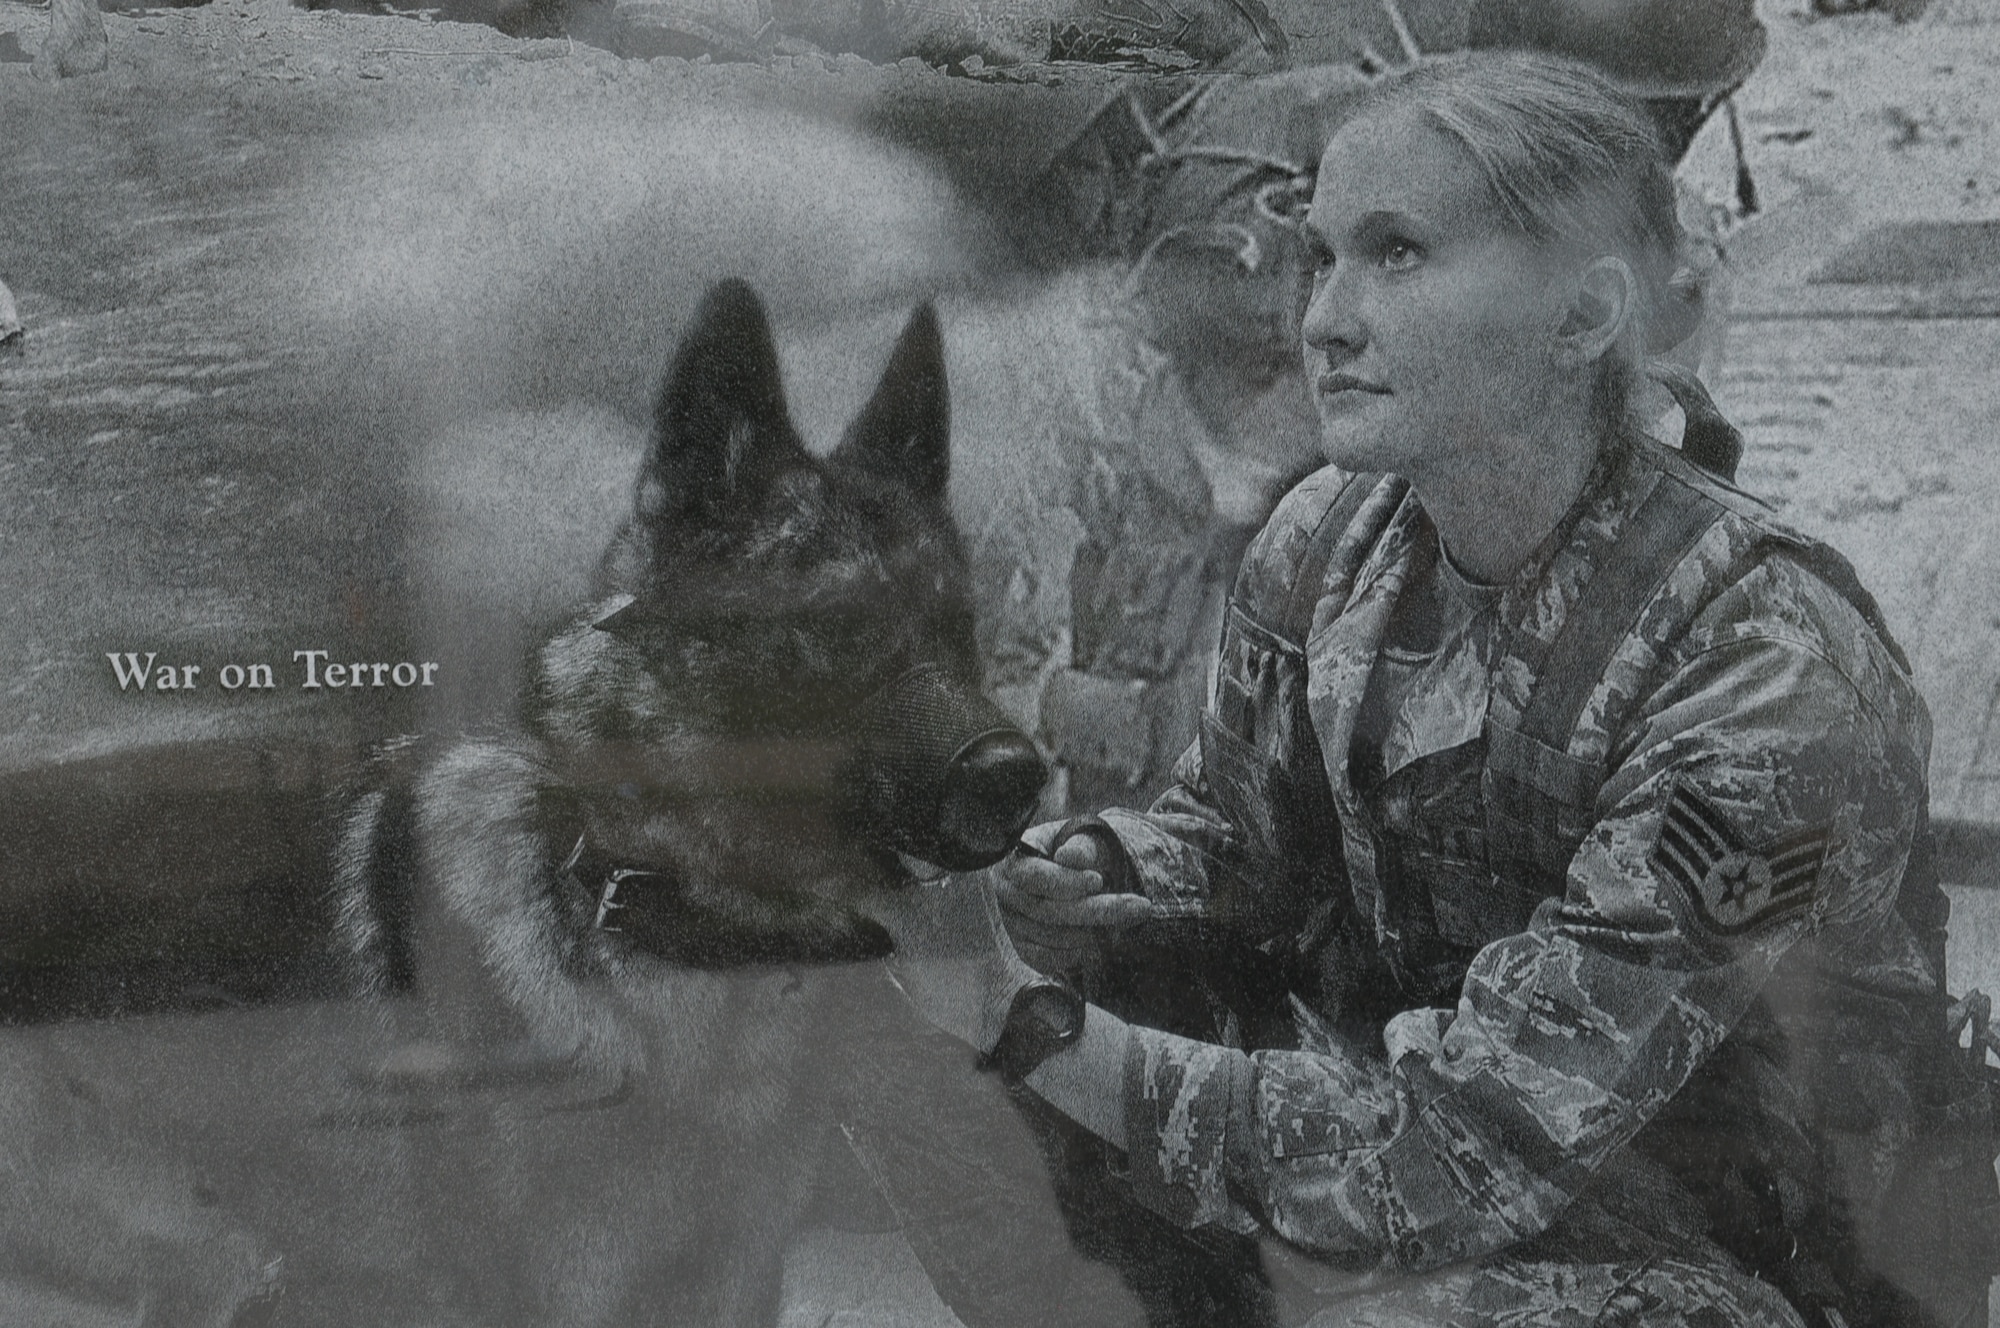 A image of a handler and her dog during War on Terror was part of a collection that create a montage that is etched onto the face of the Military Working Dog Teams’ National Monument which was revealed Oct. 28, 2013 at Joint Base San Antonio-Lackland, Texas. The Department of Defense Military Working Dog Program is located at JBSA-Lackland where teams have been trained since 1958. (U.S. Air Force photo by Airman 1st Class Krystal M. Jeffers/Released)